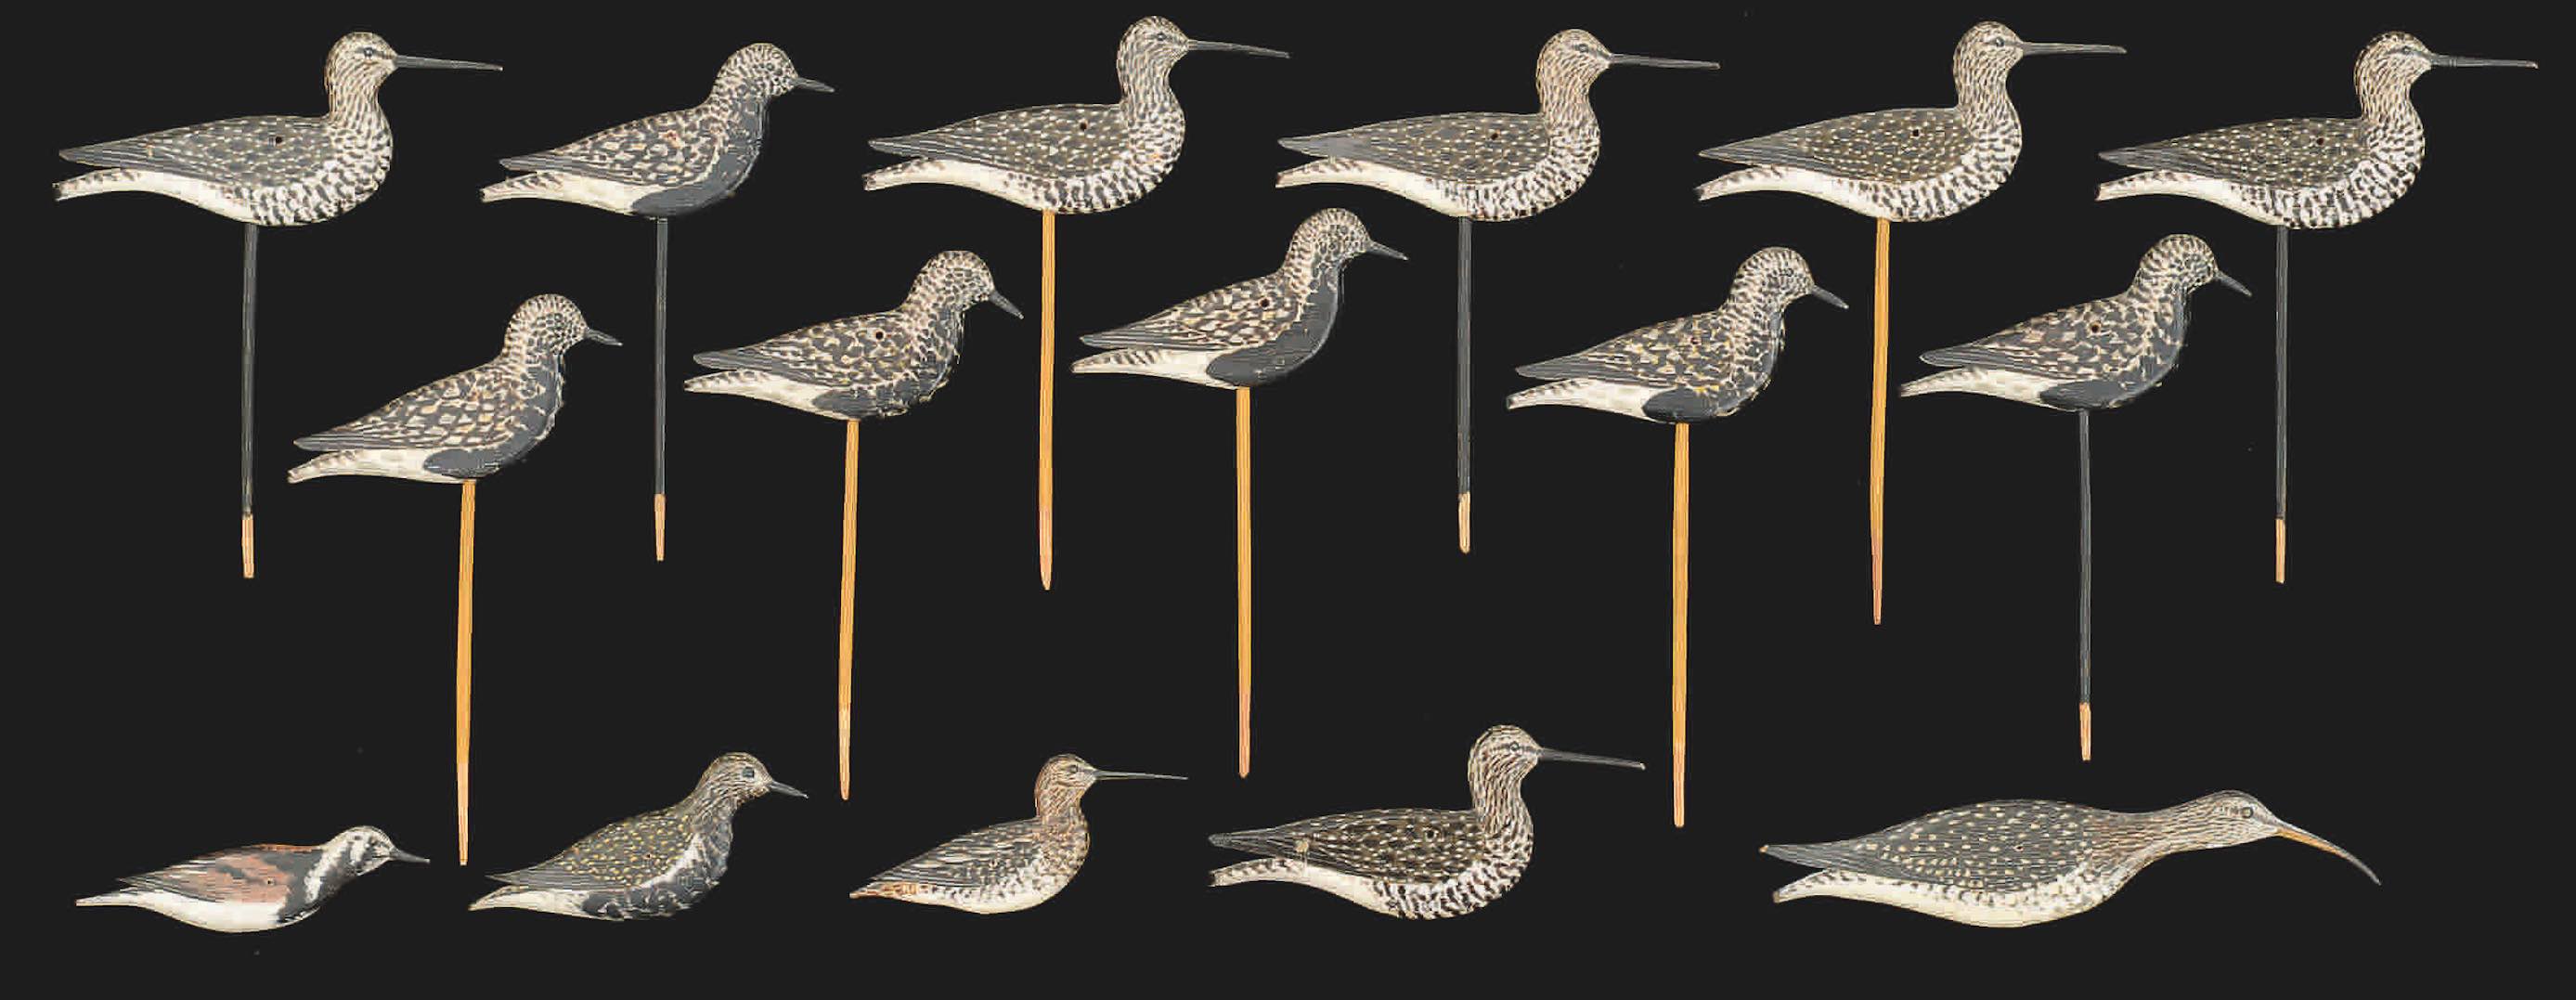 Sixteen Silhouette Carved Wood And Painted Shorebird Decoys Realized $90,060.